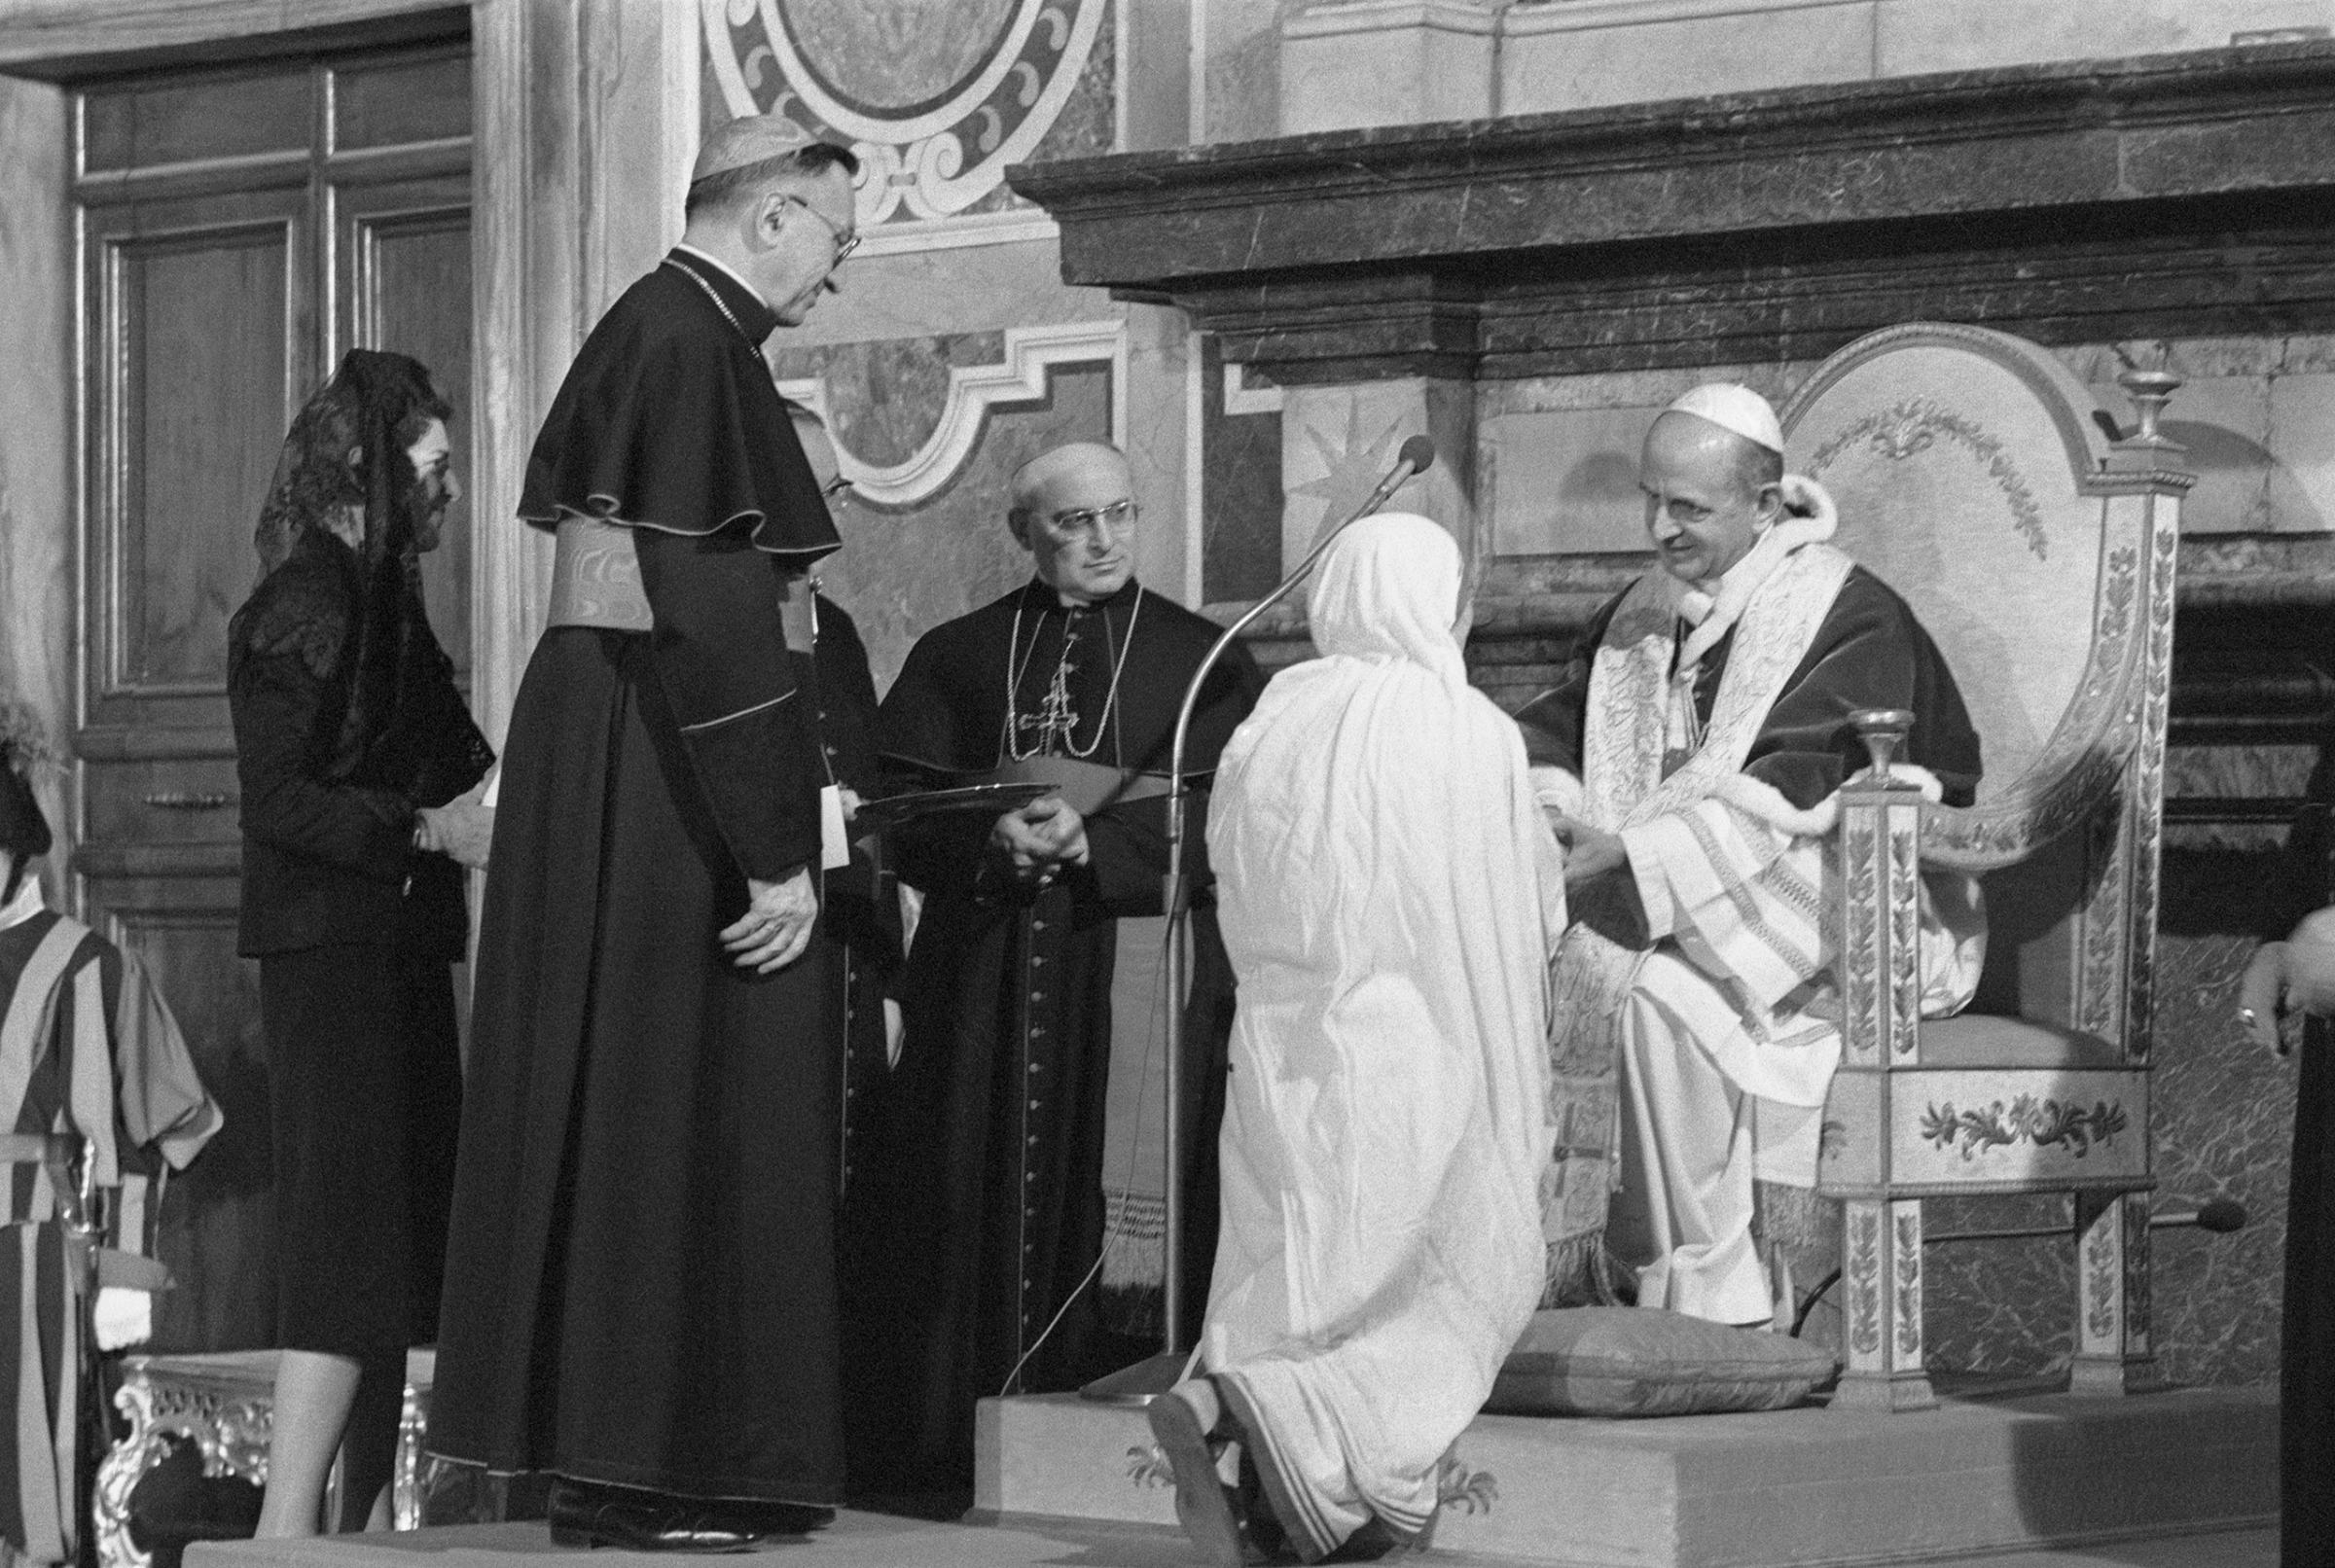 Pope Paul VI awards the first Pope John XXIII Peace Prize to Mother Teresa for her work among the poor in Calcutta and her founding of an order dedicated working with the poor.